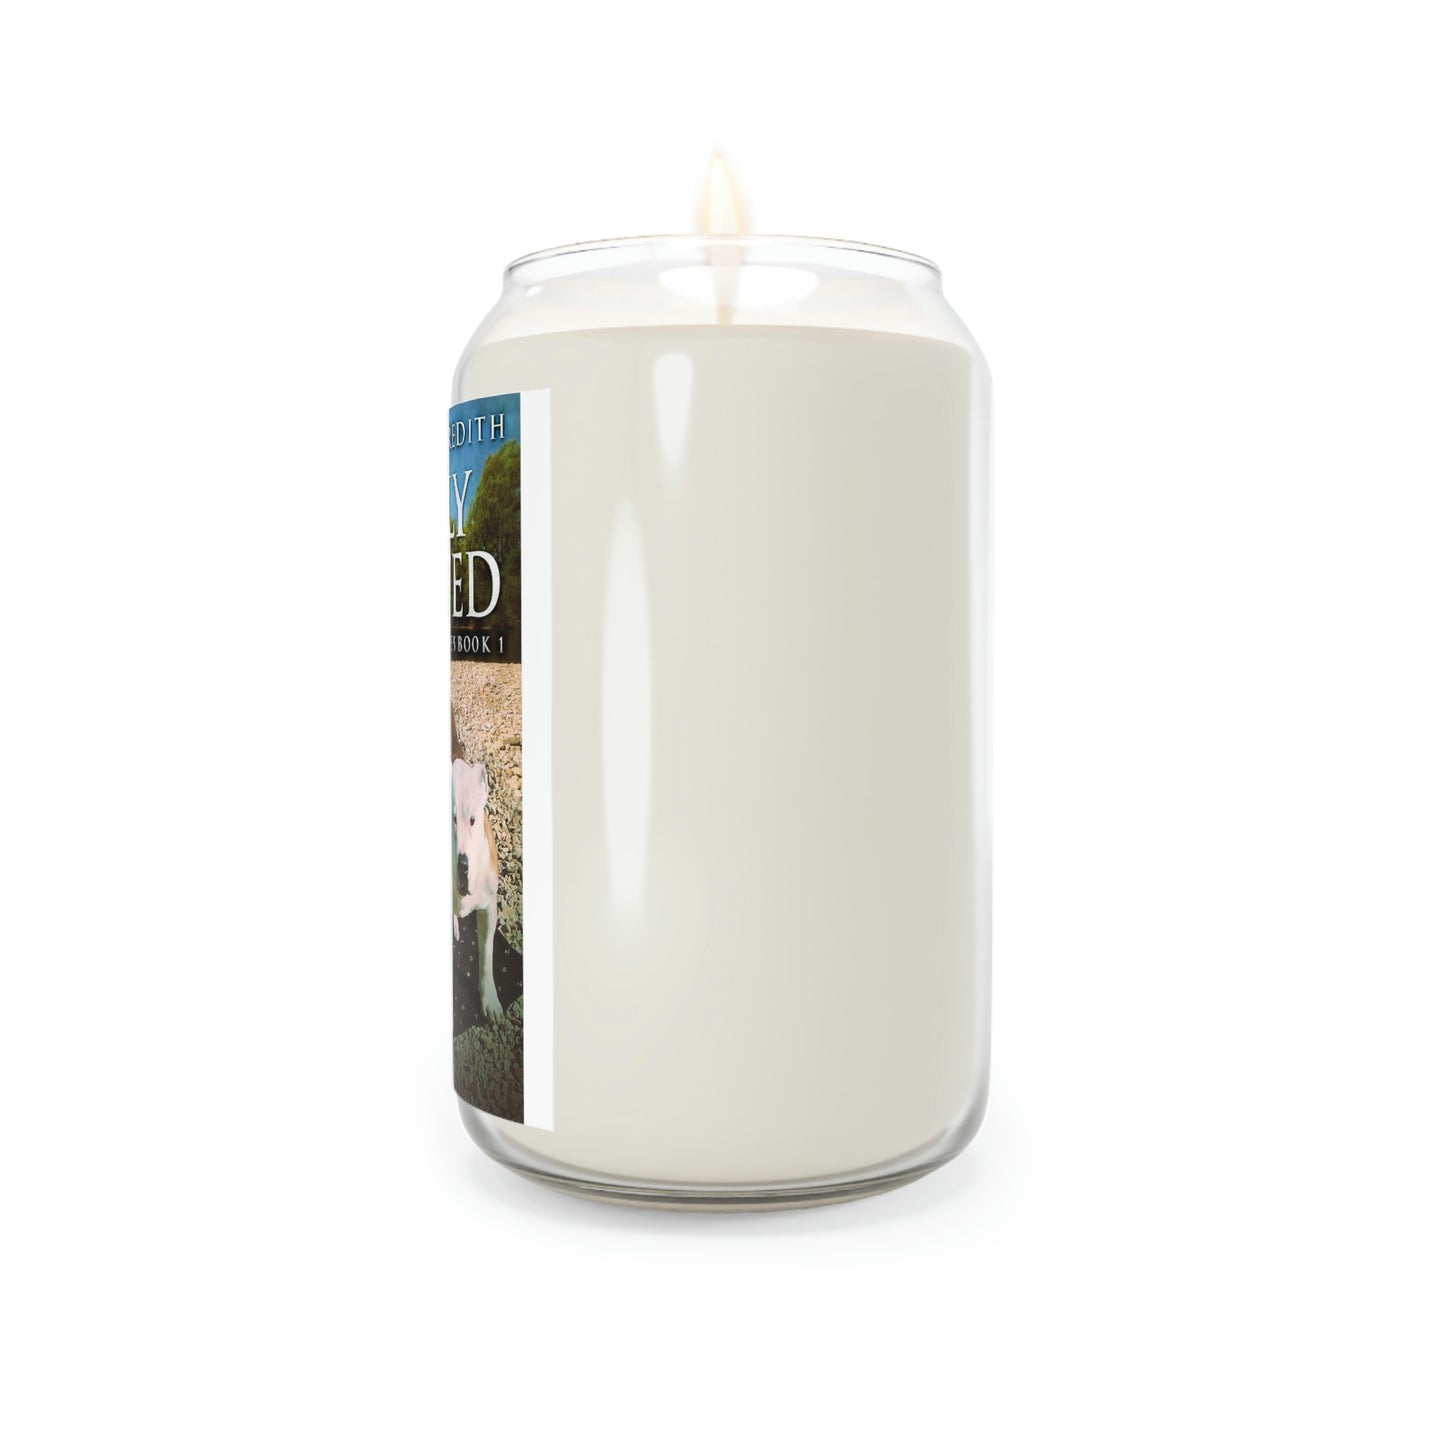 Fully Staffed - Scented Candle